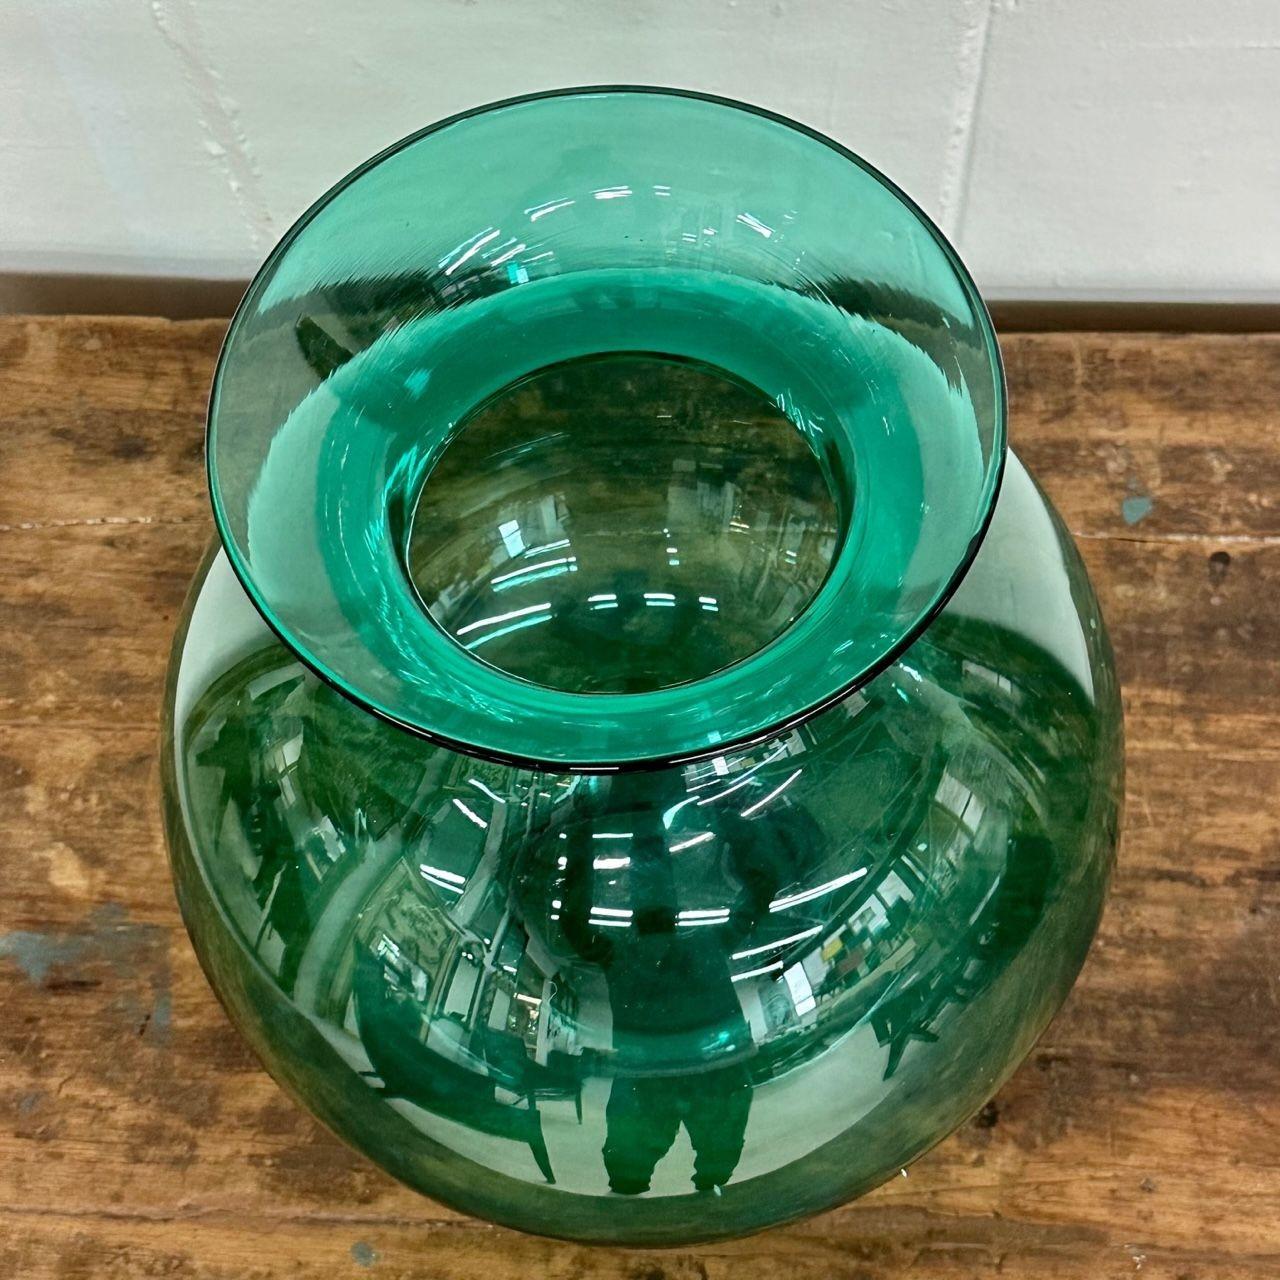 Large Mid-Century Modern Handblown Glass Turquoise Table Vase / Vessel by Blenko For Sale 1